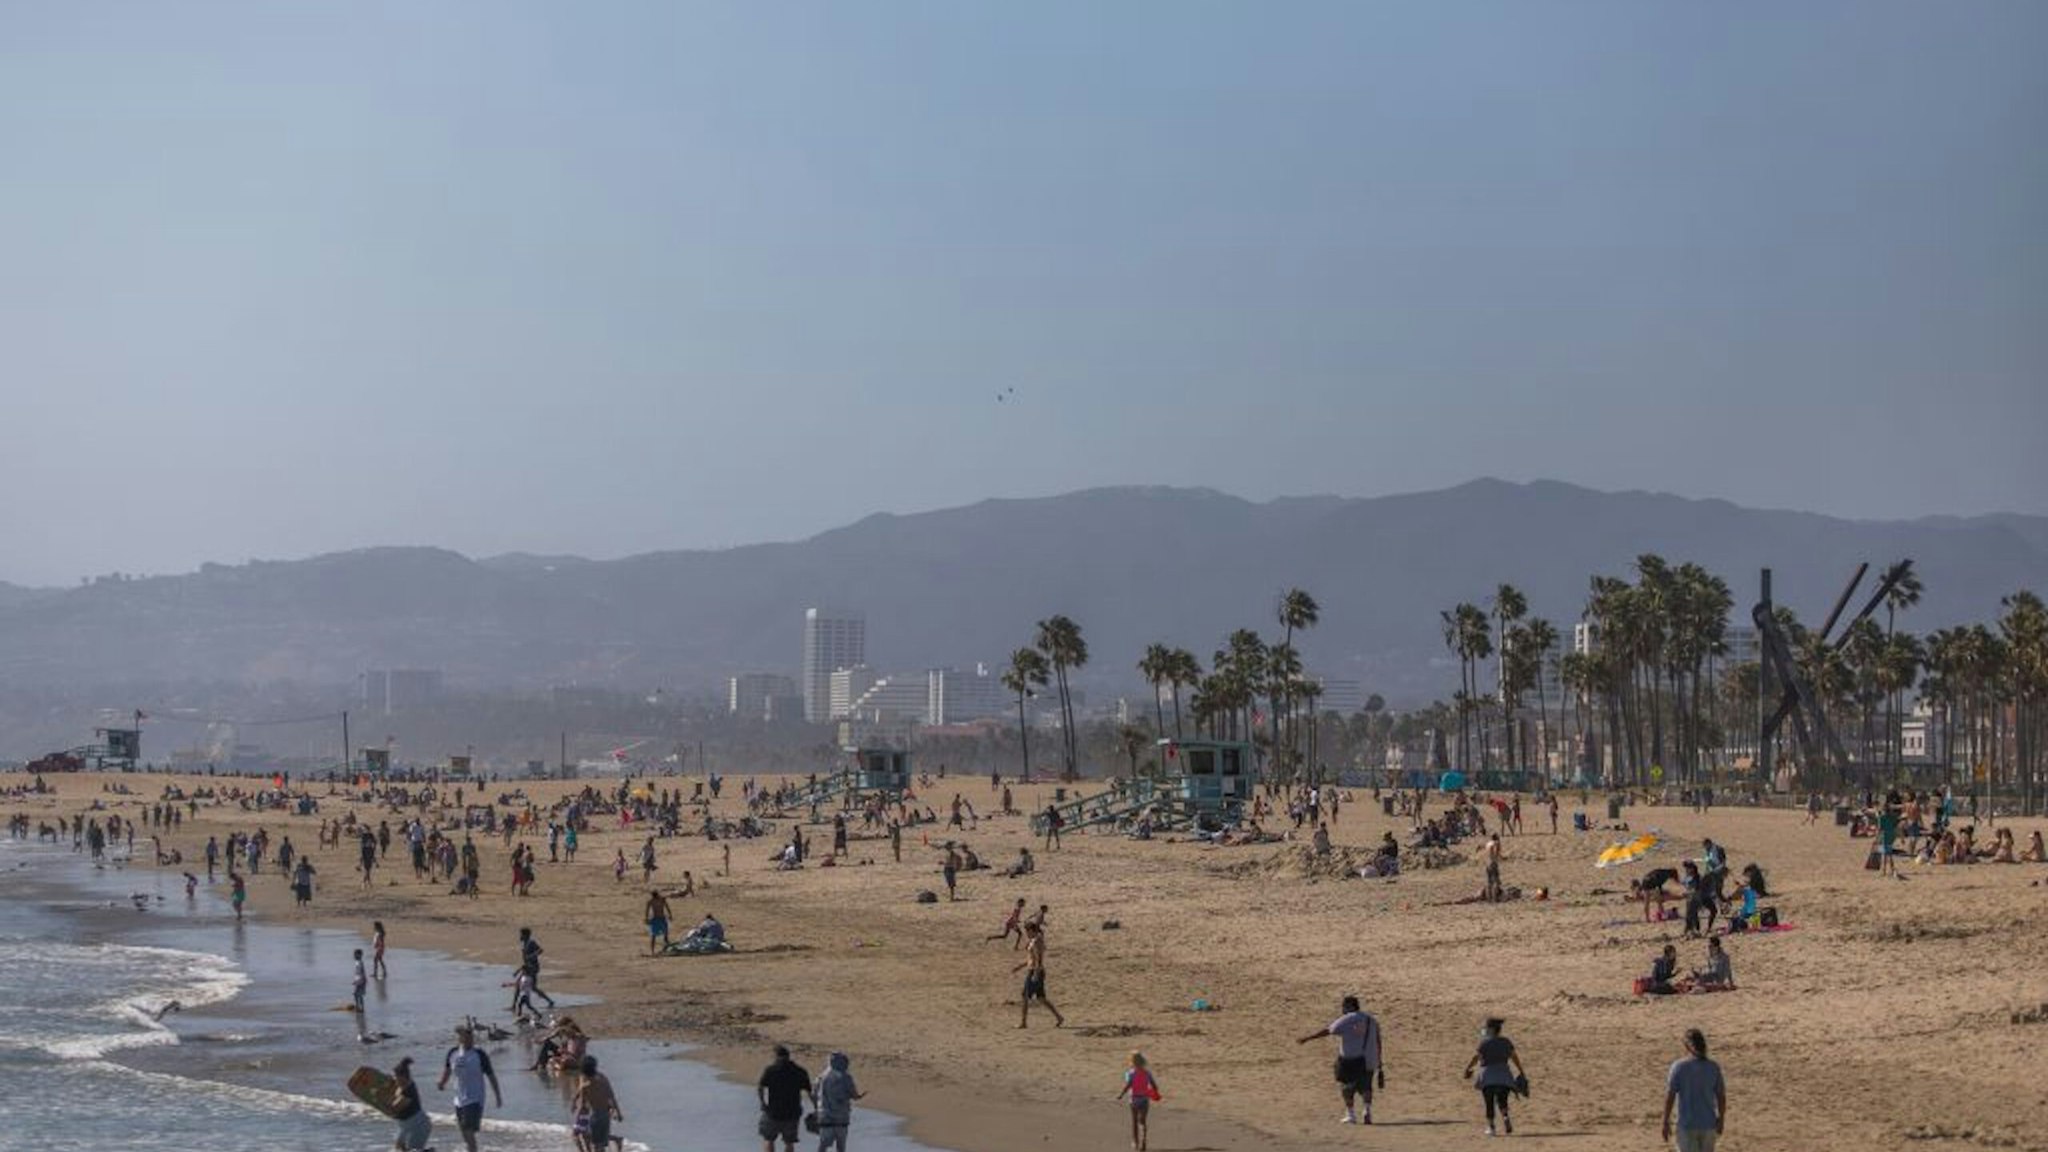 People enjoy Venice Beach during the first day of the Memorial Day holiday weekend during the novel Coronavirus, COVID-19, pandemic in California on May 23, 2020. - Los Angeles County officials announced May 22, 2020, that beach bike paths and some beach parking lots will reopen and curbside service at indoor malls will be permitted. The county reopened its beaches a week ago but kept beach parking lots, bike paths, piers and boardwalks closed. (Photo by Apu GOMES / AFP)